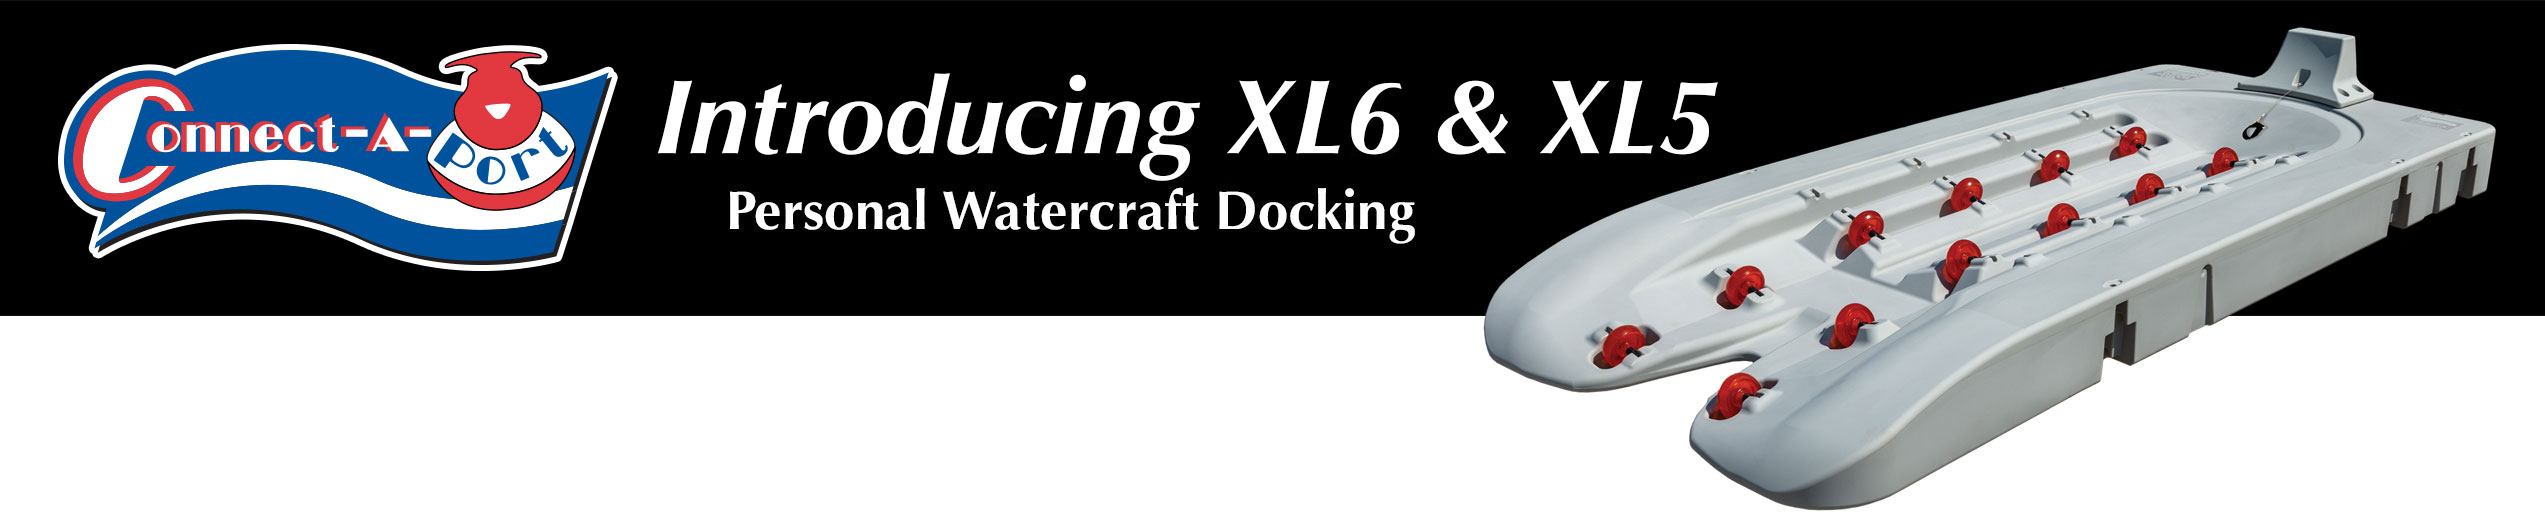 Introducing the Connect-A-Port XL6 - PWC Docking